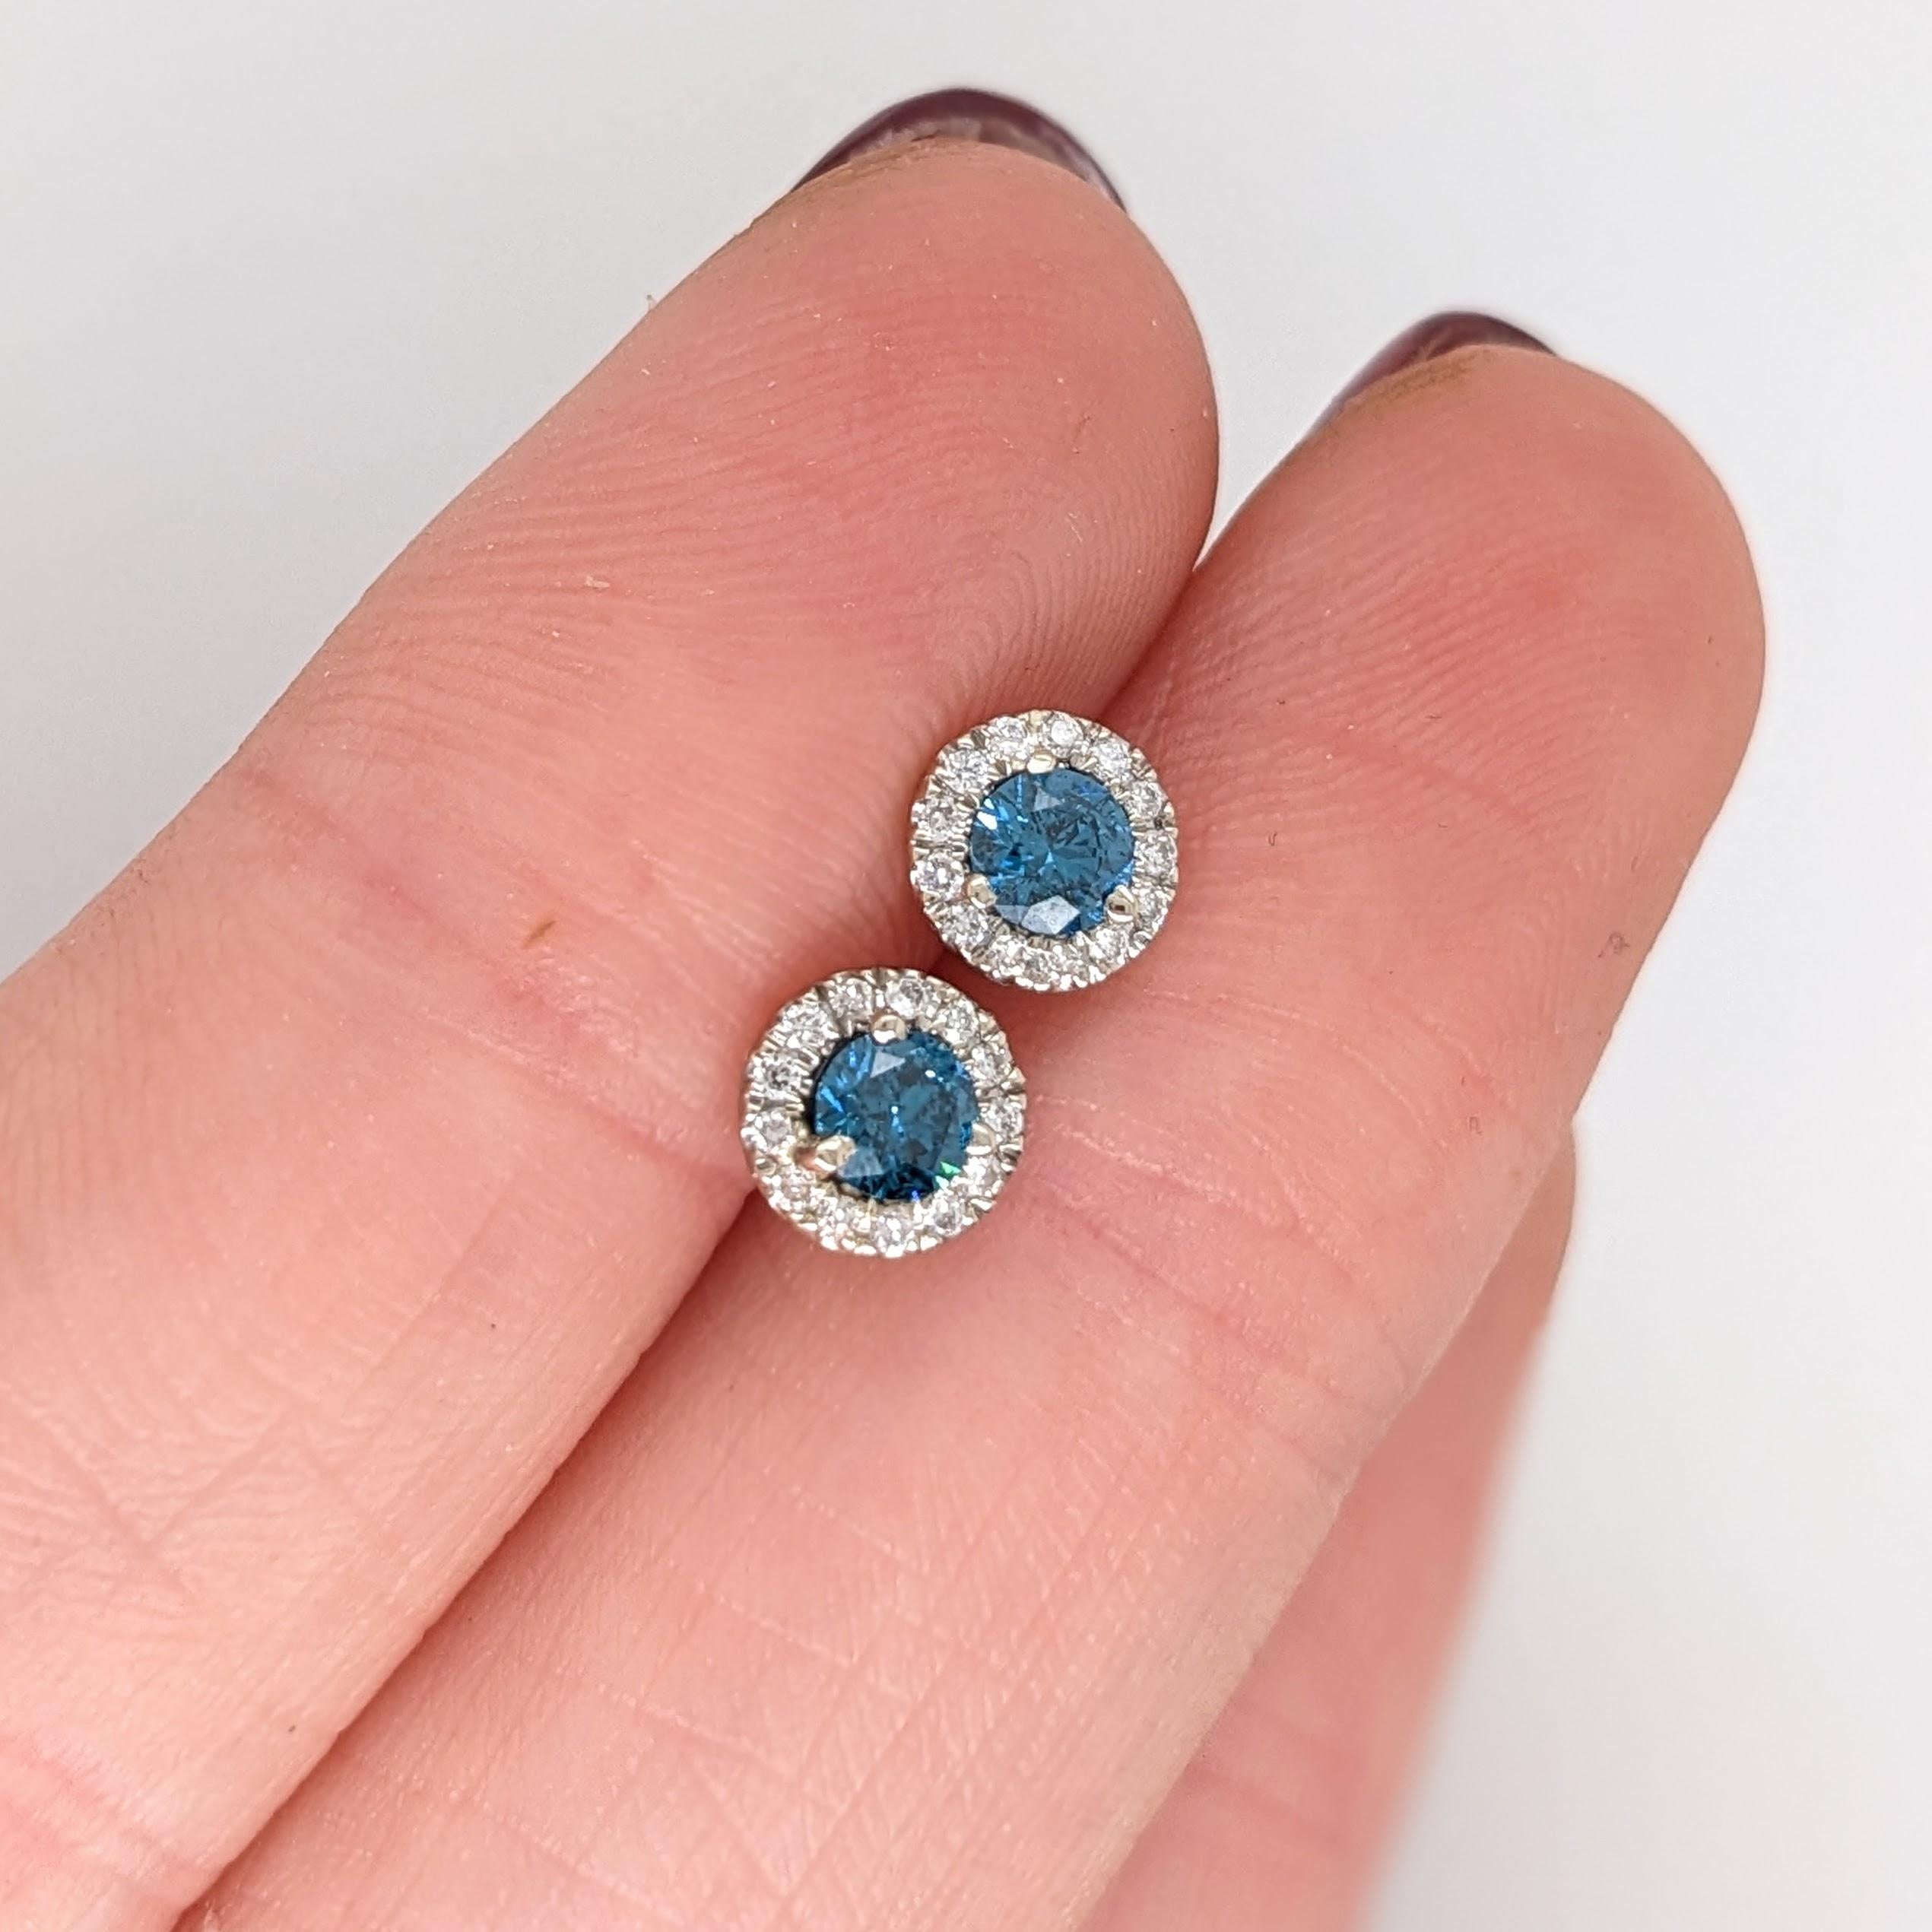 These classic design stud earrings feature two round 0.36 cttw blue diamonds with natural earth mined diamonds in all solid 14K white gold. These earrings make a beautiful april birthstone gift for your loved ones! 

Specifications

Item Type: